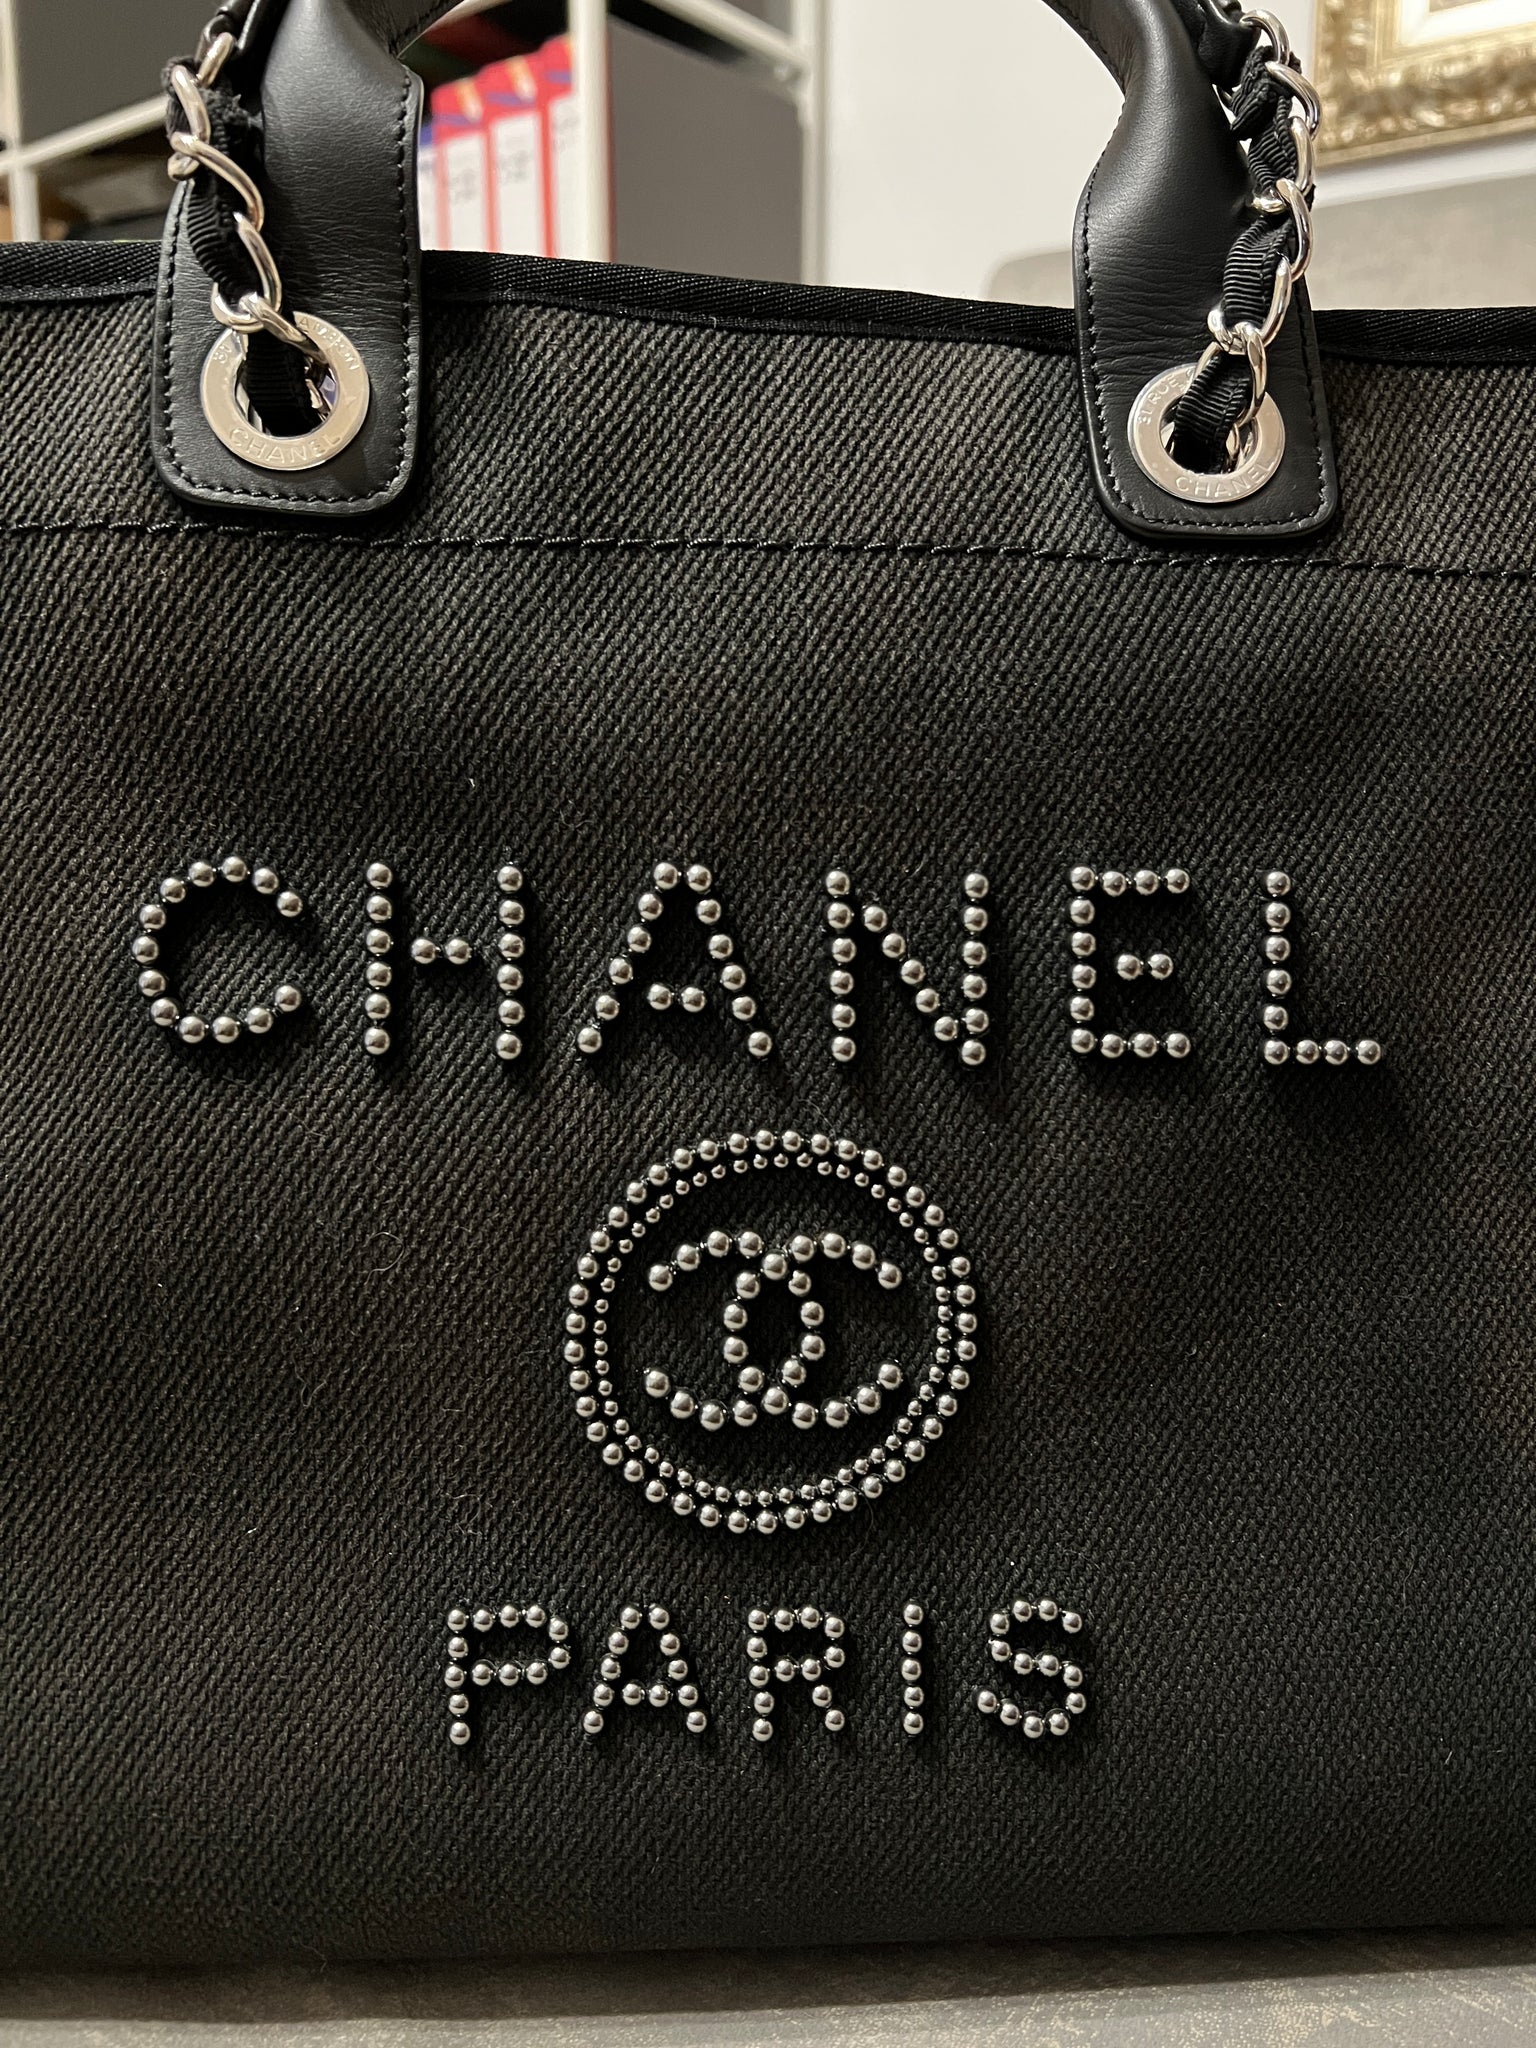 Chanel Deauville Tote Bag – LuxCollector Vintage